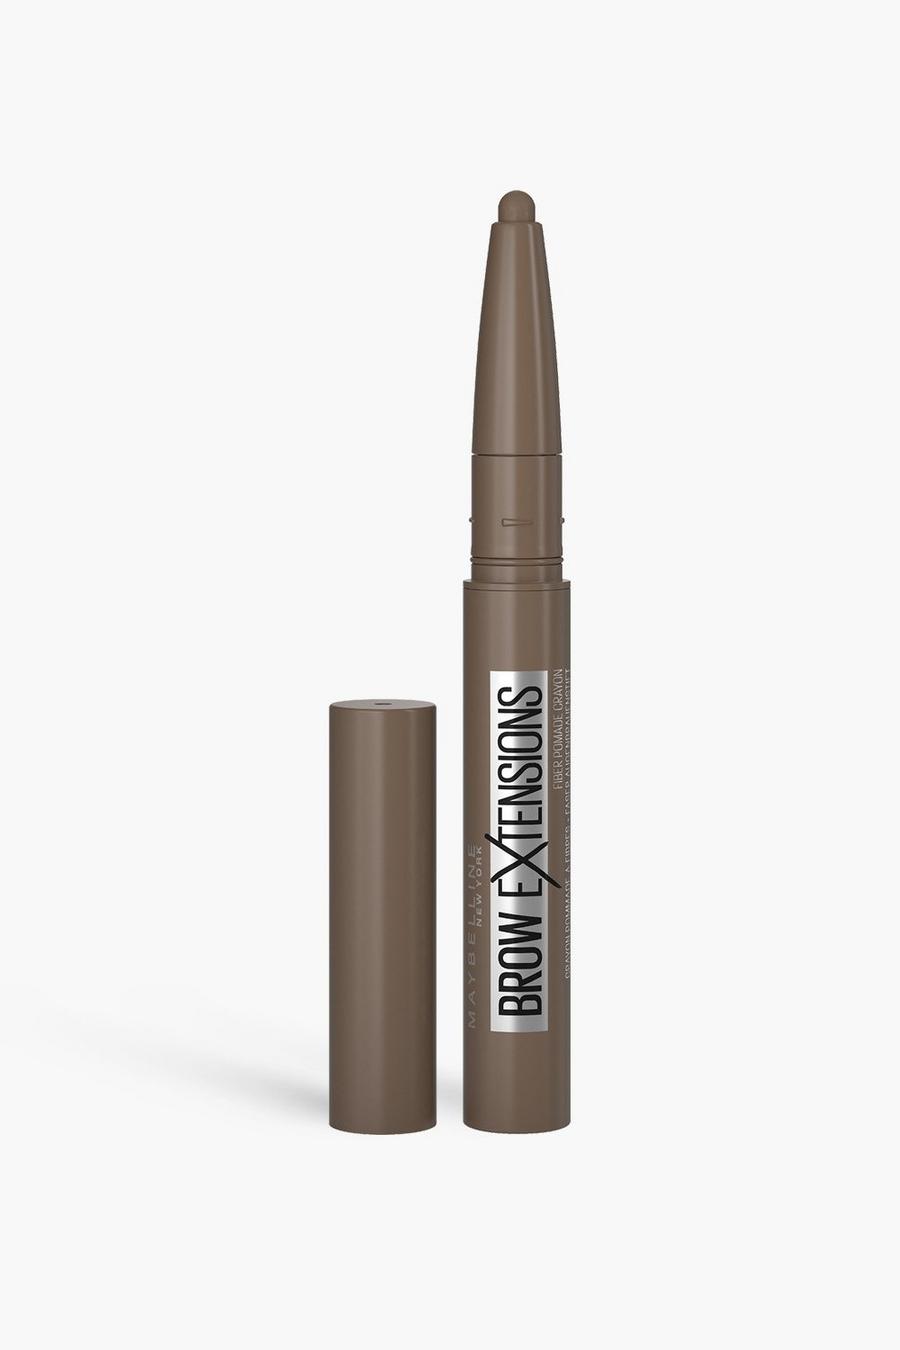 Maybelline Brow Extensions Eyebrow Pomade Crayon - 04 Medium Brown image number 1